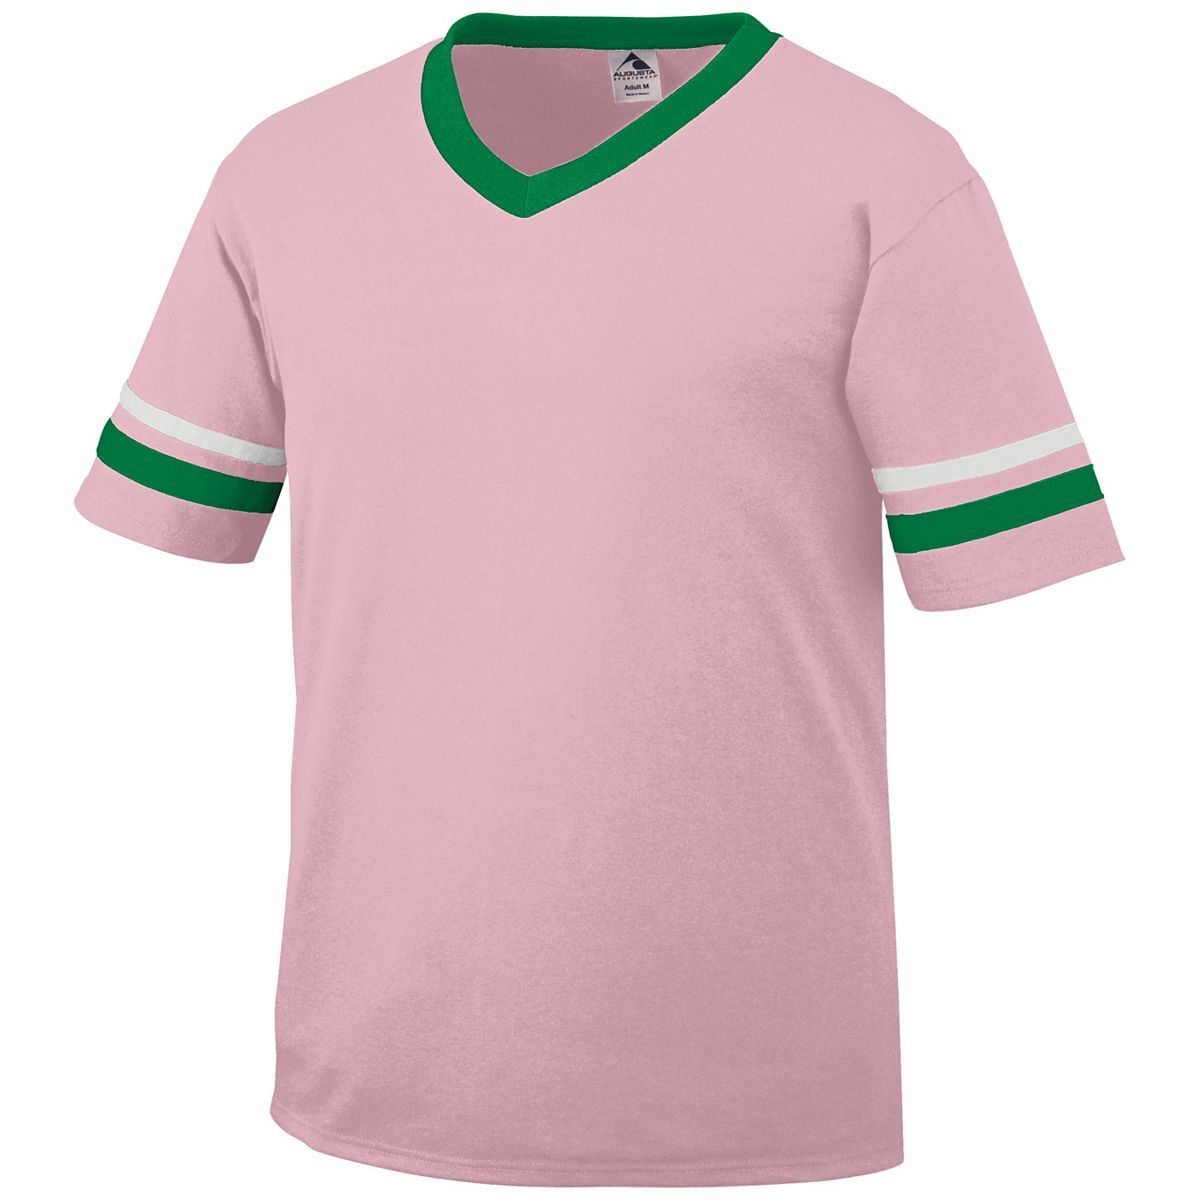 Augusta Sportswear Youth Sleeve Stripe Jersey in Light Pink/Kelly/White  -Part of the Youth, Youth-Jersey, Augusta-Products, Shirts product lines at KanaleyCreations.com